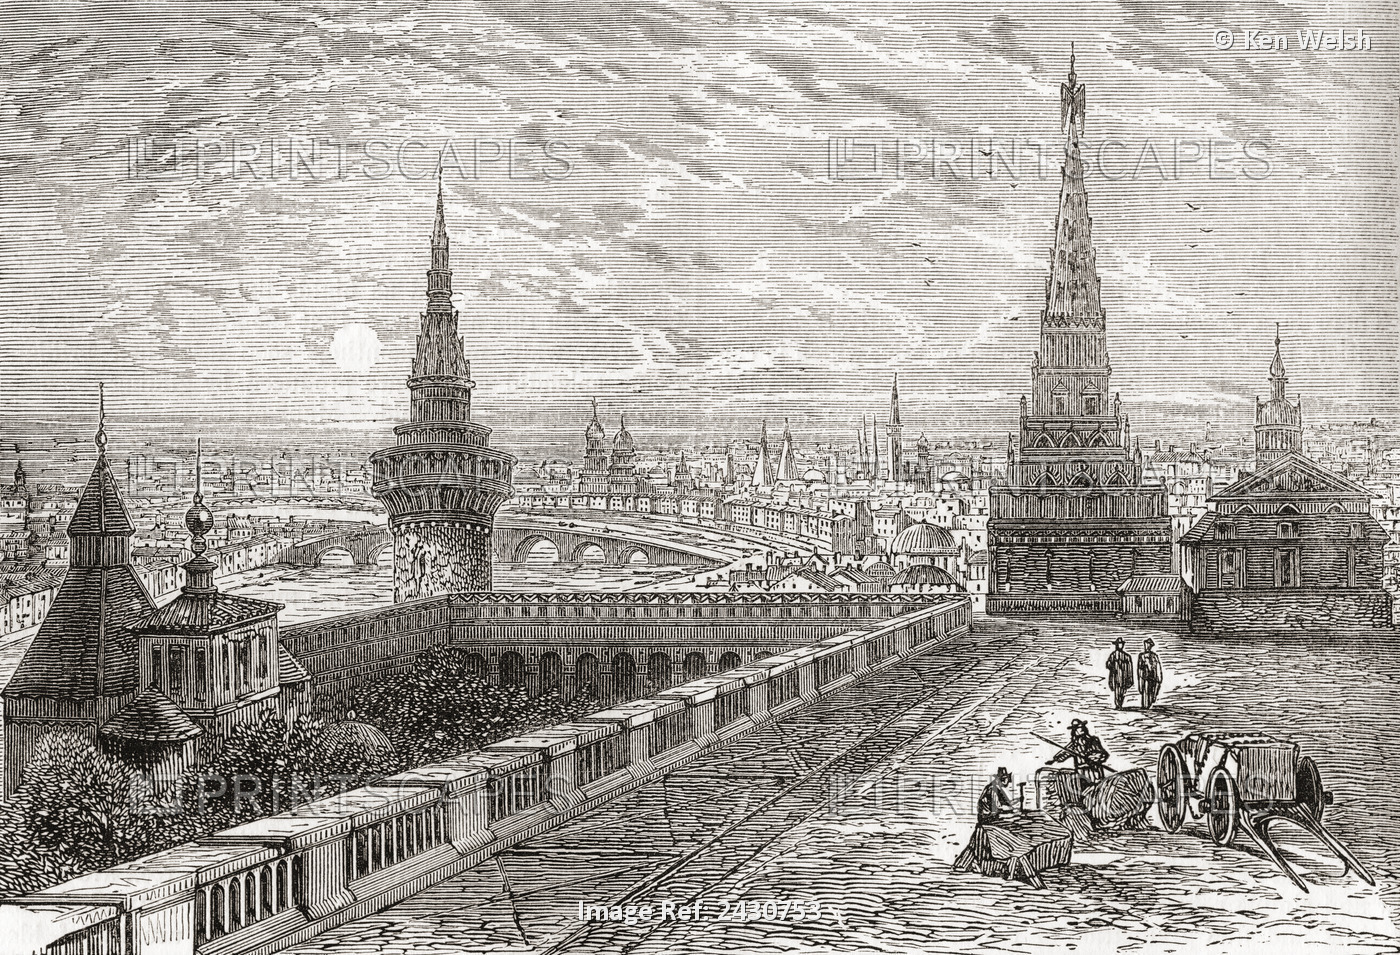 Moscow, Russia In The 19th Century. From The National Encyclopaedia, Published ...